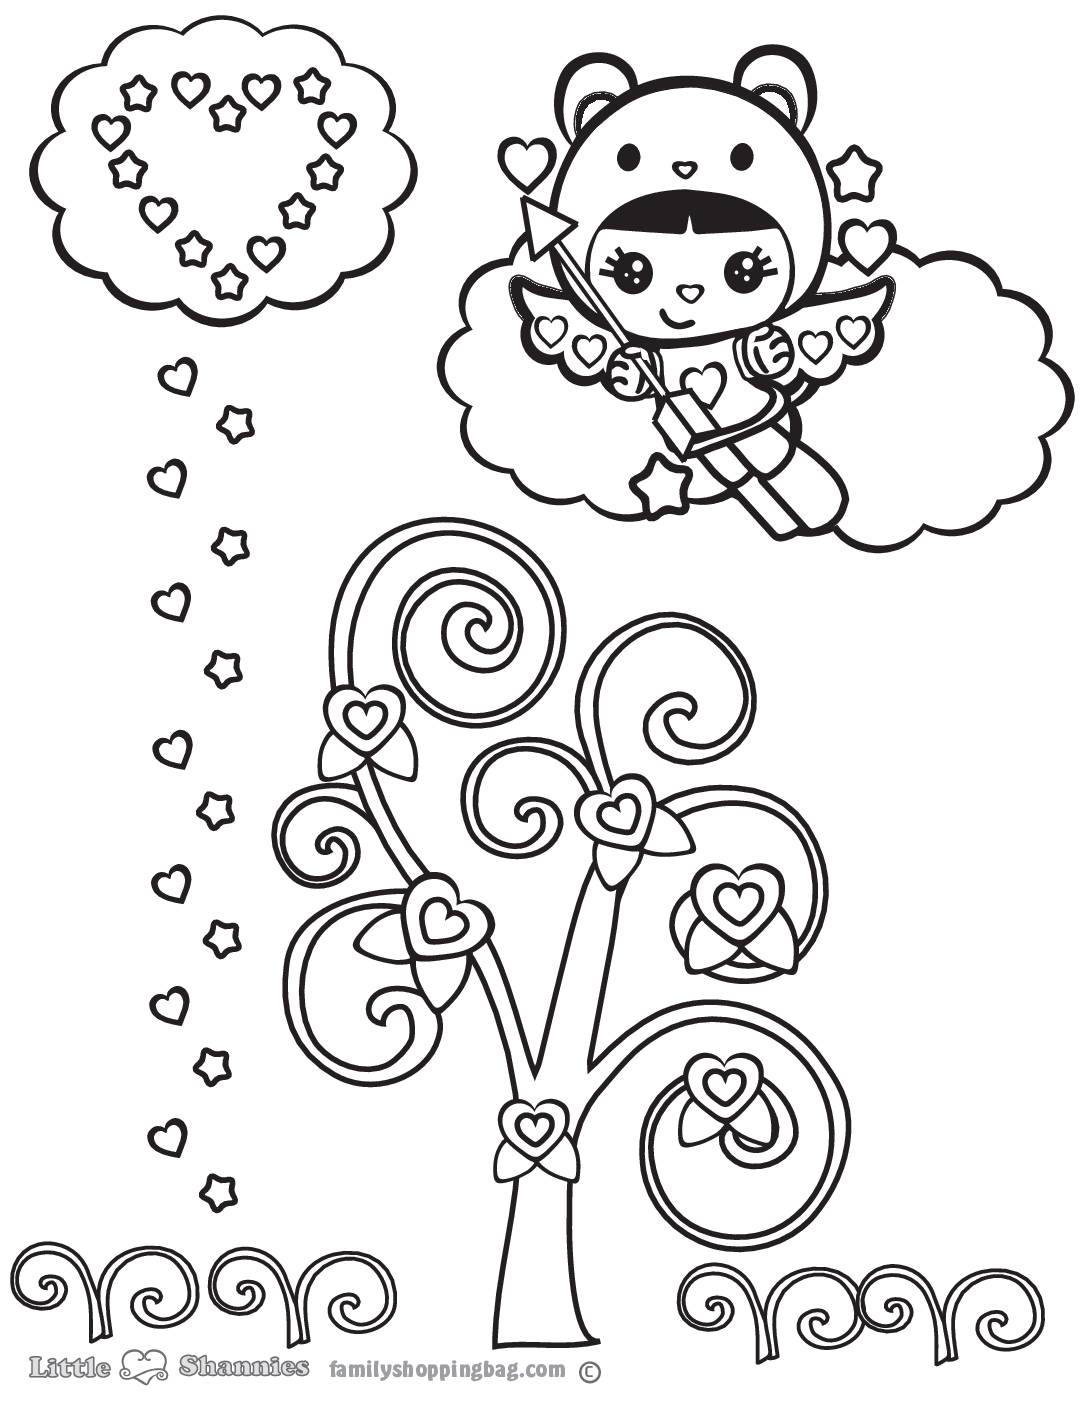 Coloring Page  Shannies   pdf